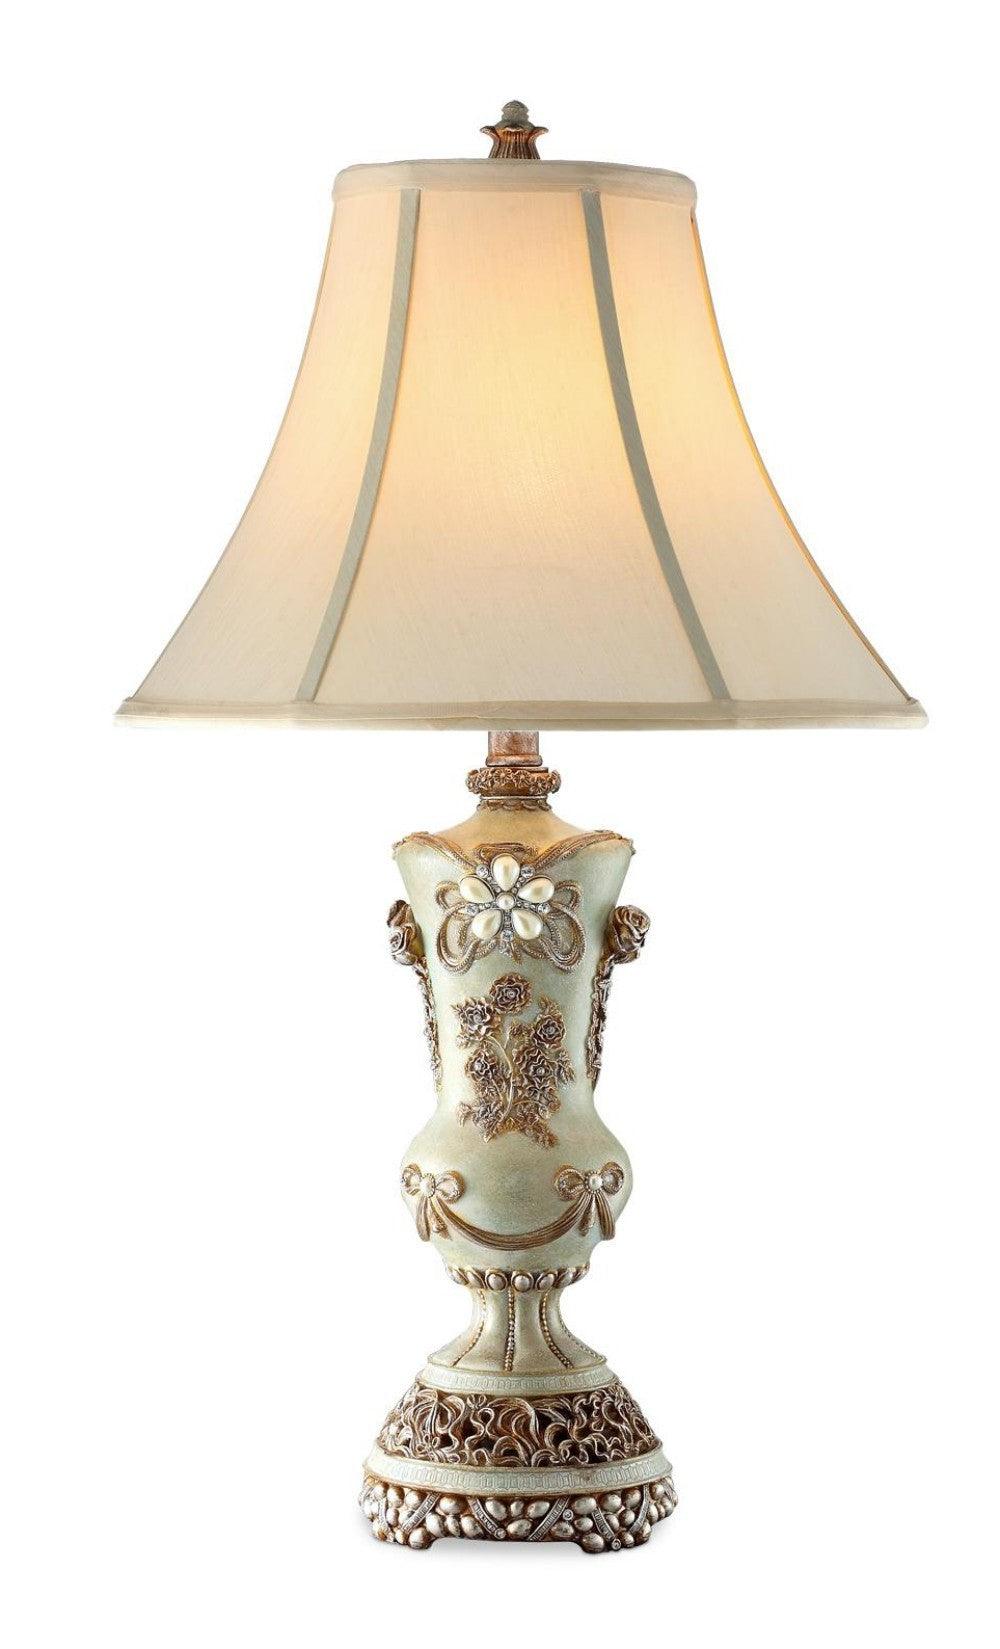 Vintage Silver Table Lamp with Rose Accents - AFS